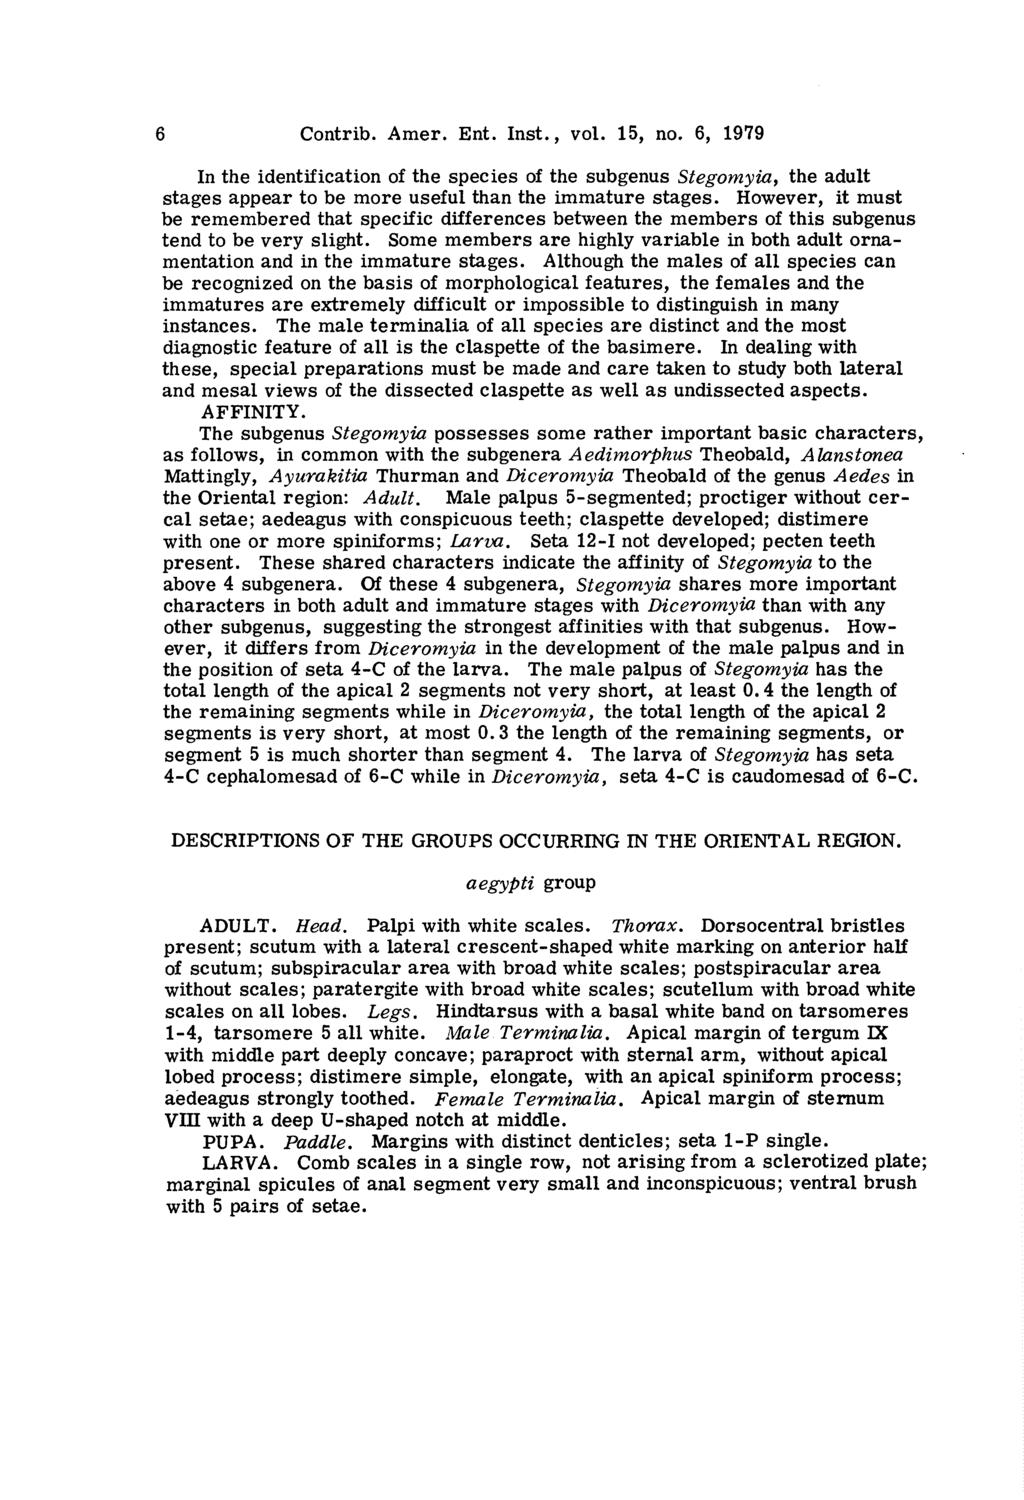 6 Contrib. Amer. Ent. Inst., vol. 15, no. 6, 1979 In the identification of the species of the subgenus Stegomyia, the adult stages appear to be more useful than the immature stages.